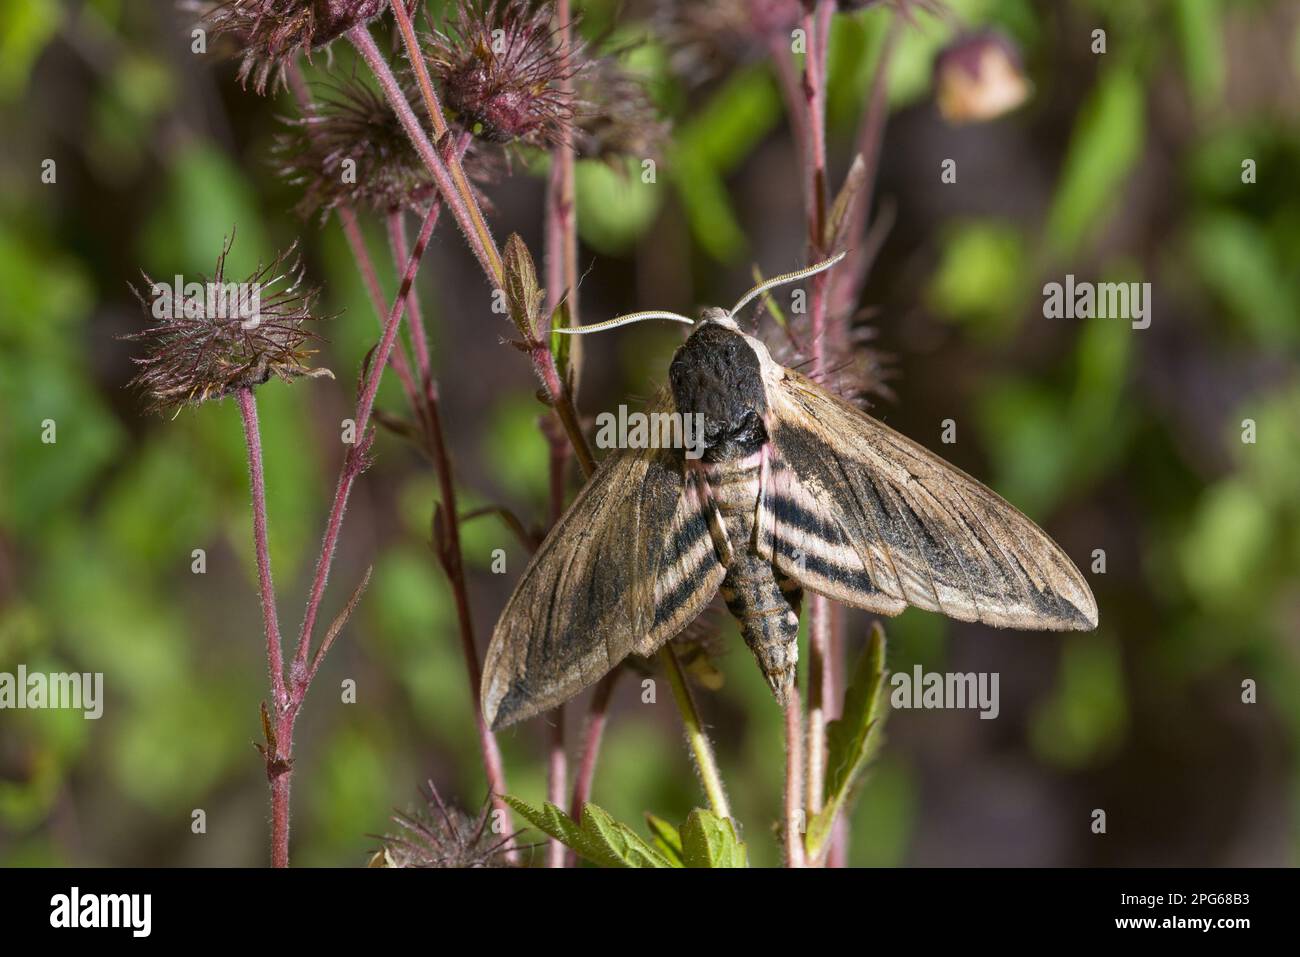 Privet hawkmoth (Sphinx ligustri), Hawkmoth, Insects, Moths, Butterflies, Animals, Other animals, Privet Hawkmoth adult, resting on seedhead Stock Photo